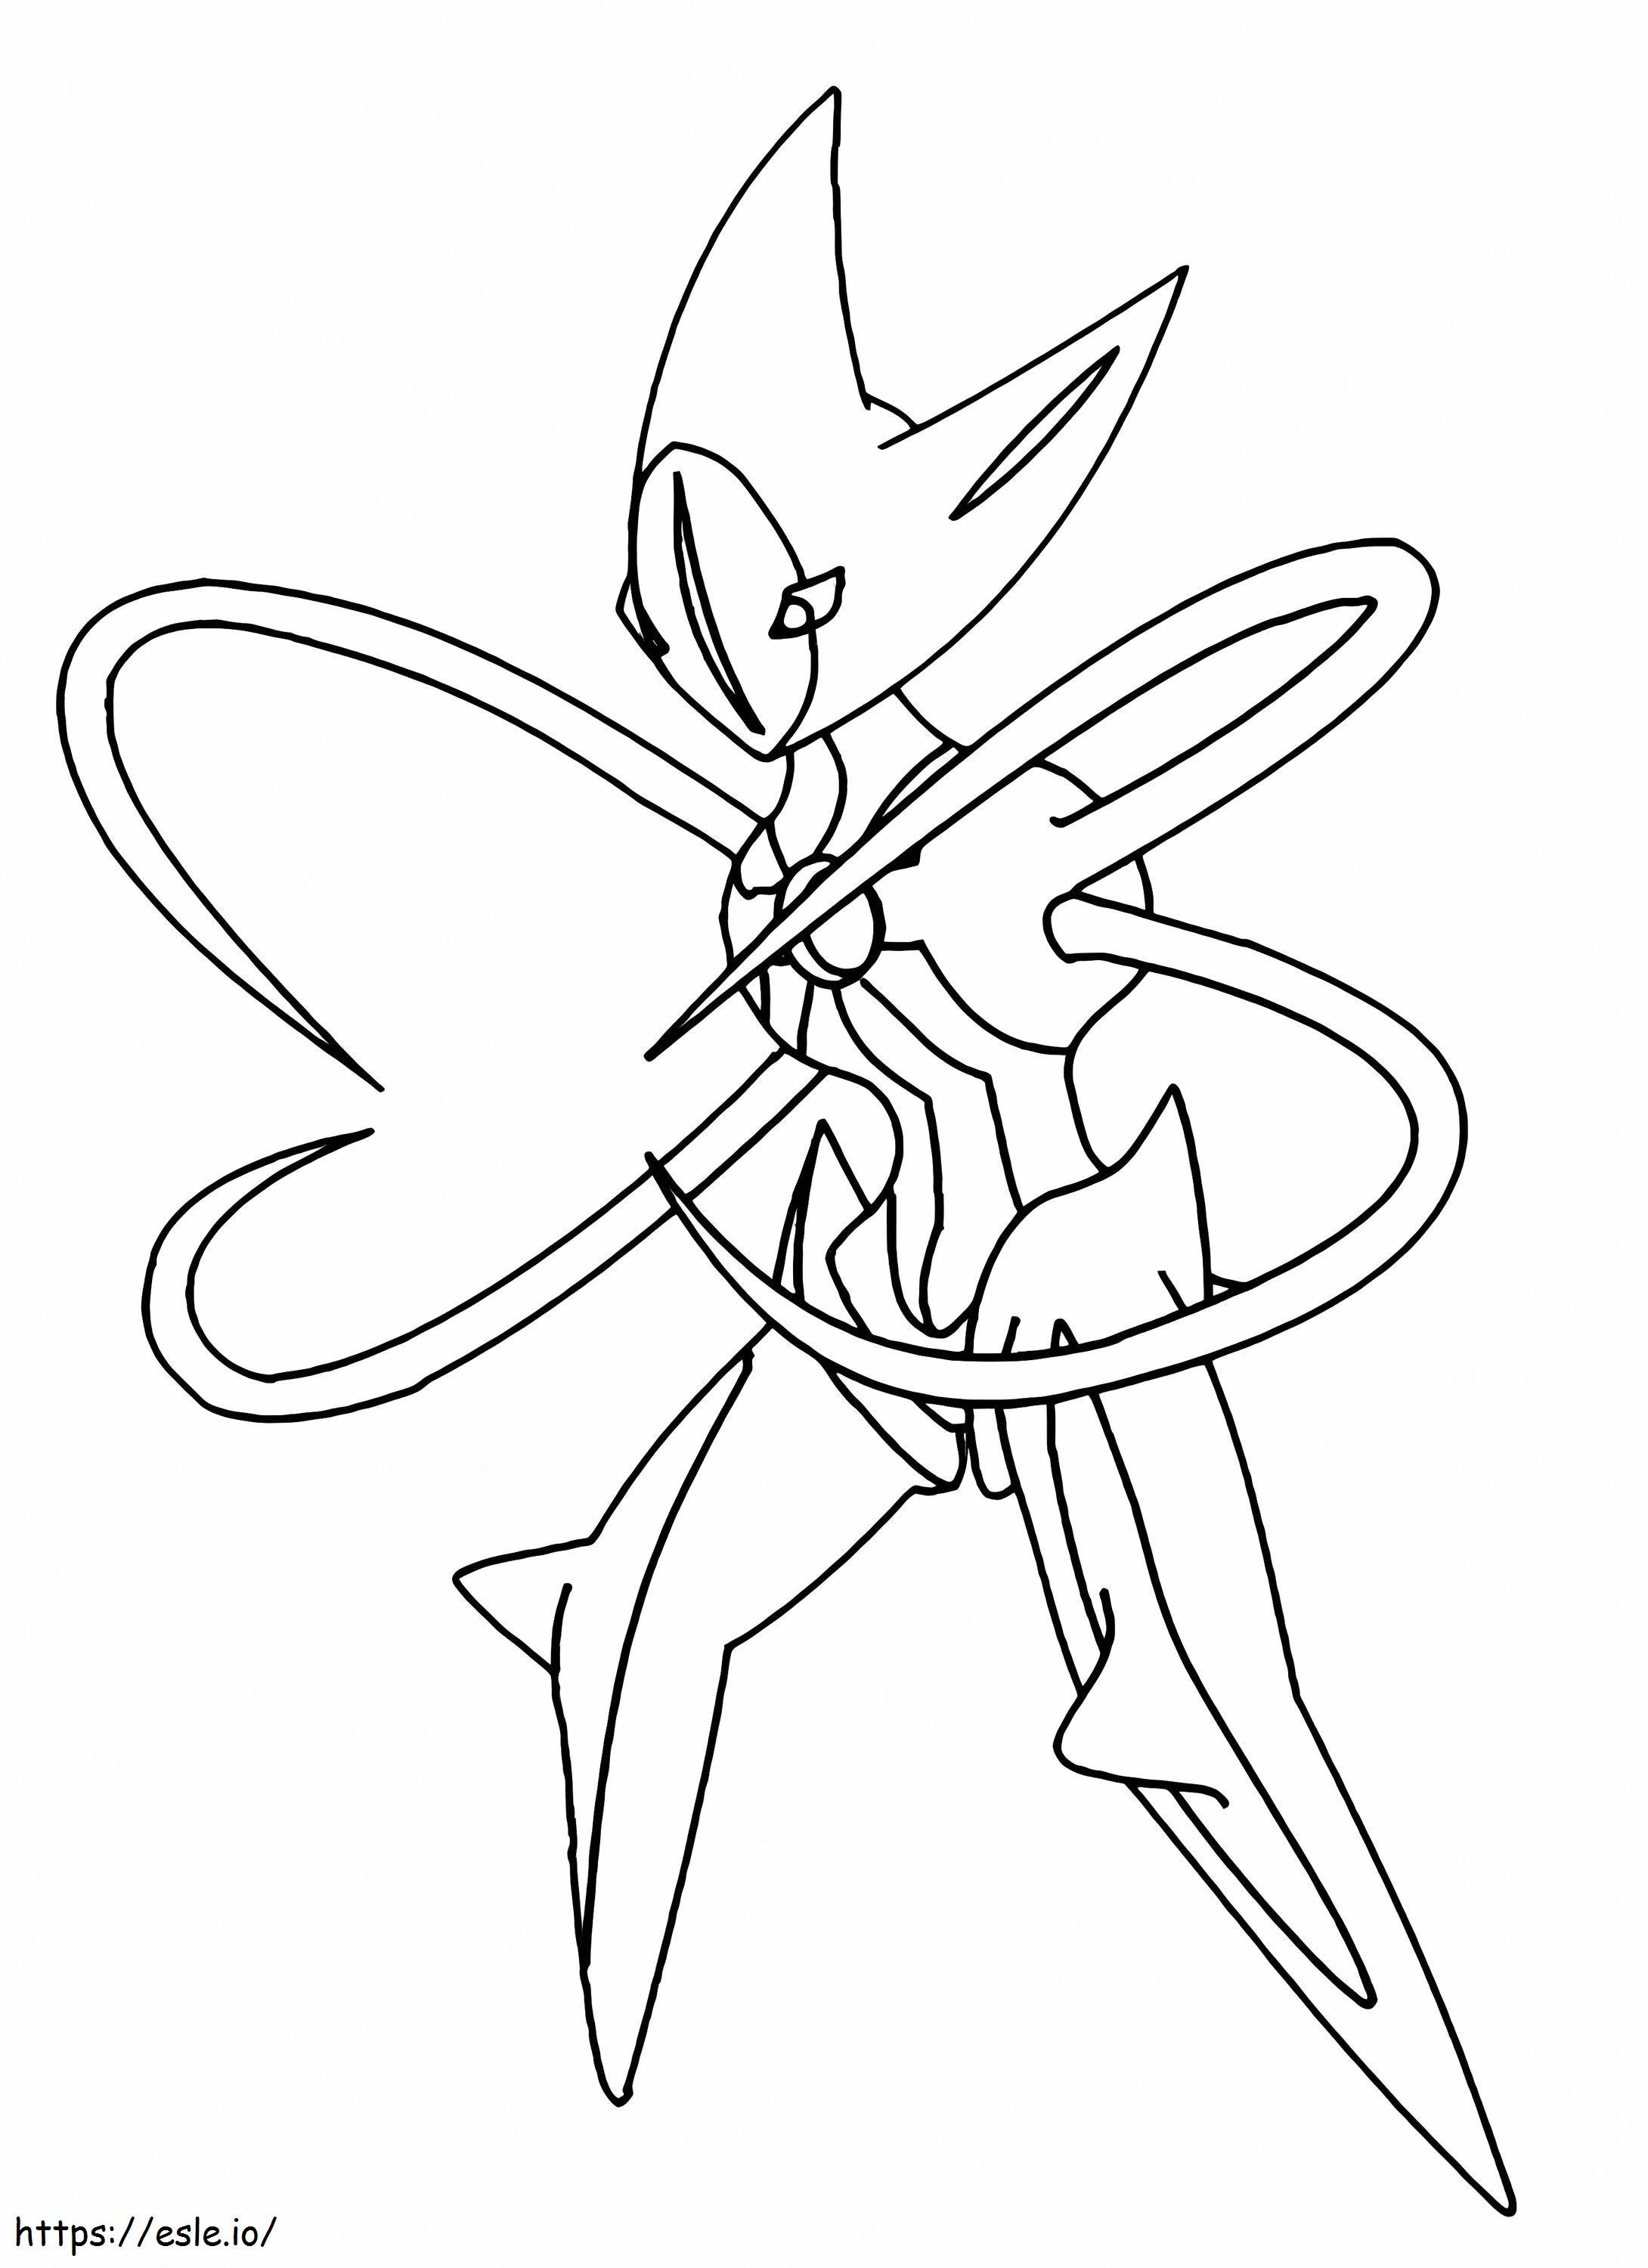 Pokemon Deoxys Attack Form coloring page